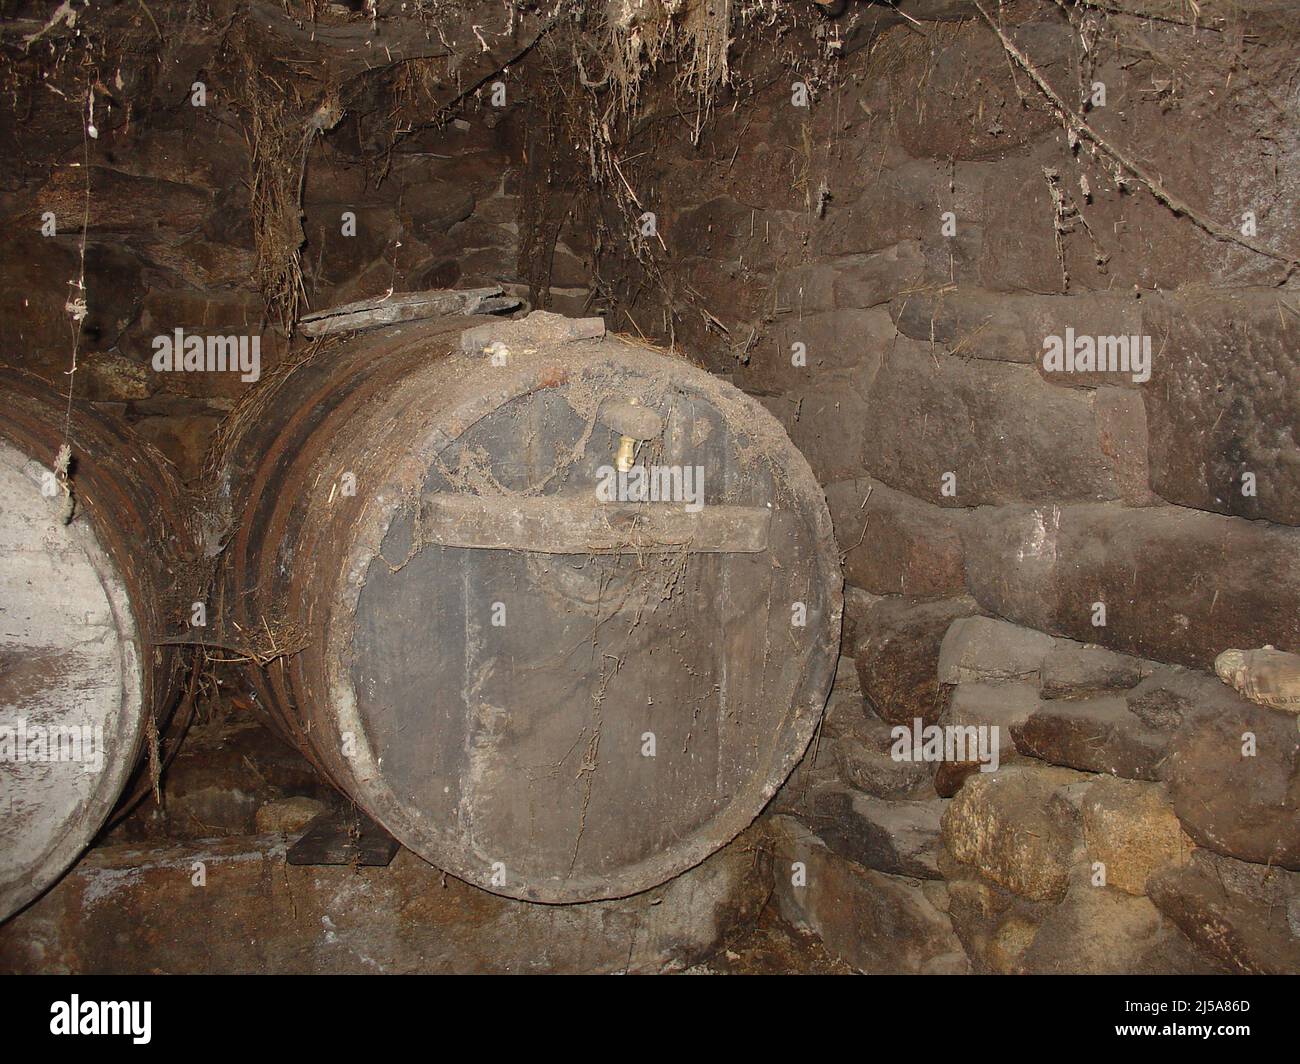 Old wine barrels founded on a old wine cave. History of wine production, wine local production, old timers, hand-made wine barrels. Stock Photo